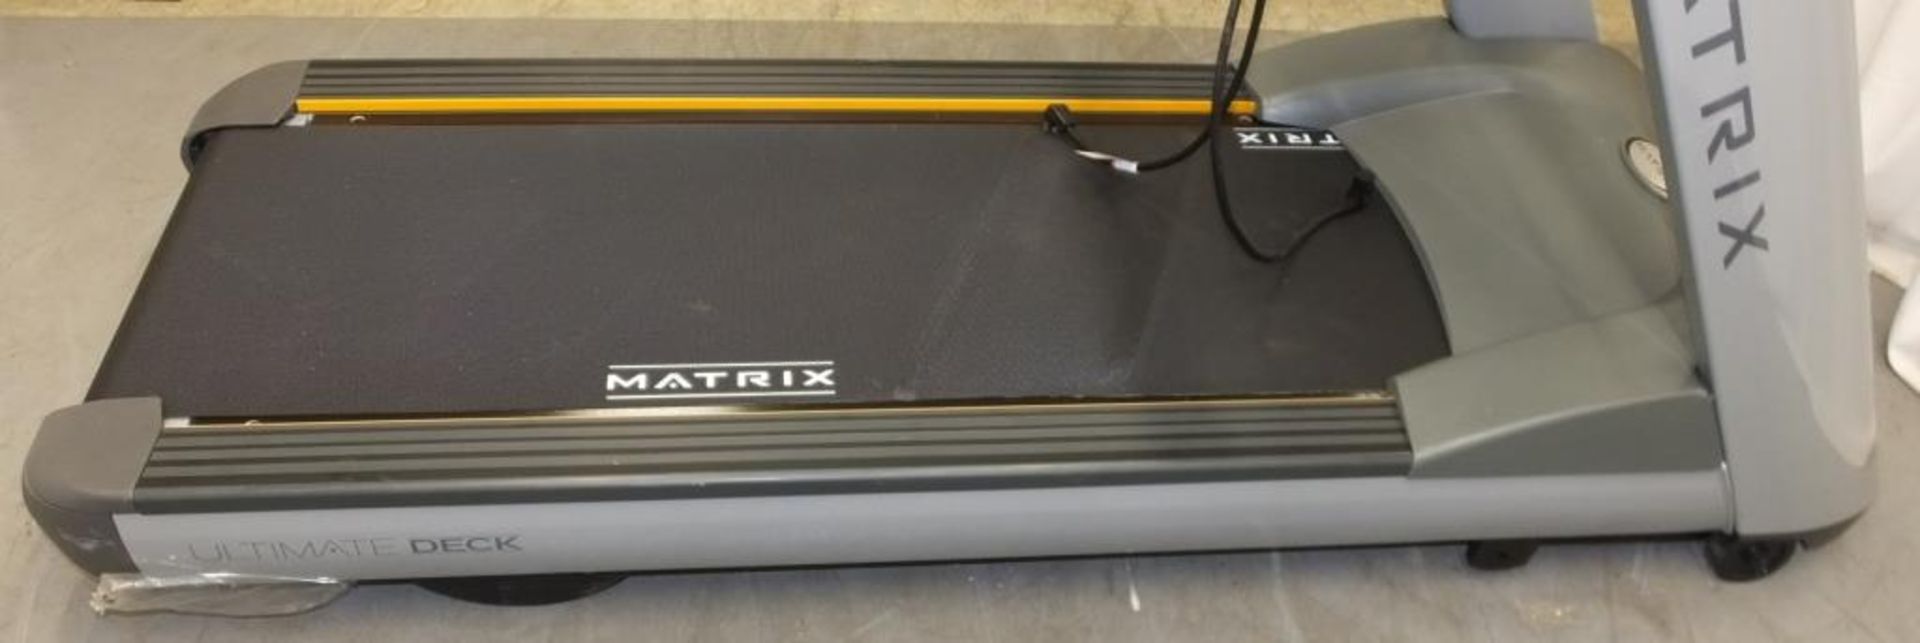 Matrix Ultimate Deck T-5x/7x treadmill - power not tested due to American power supply - Image 6 of 8